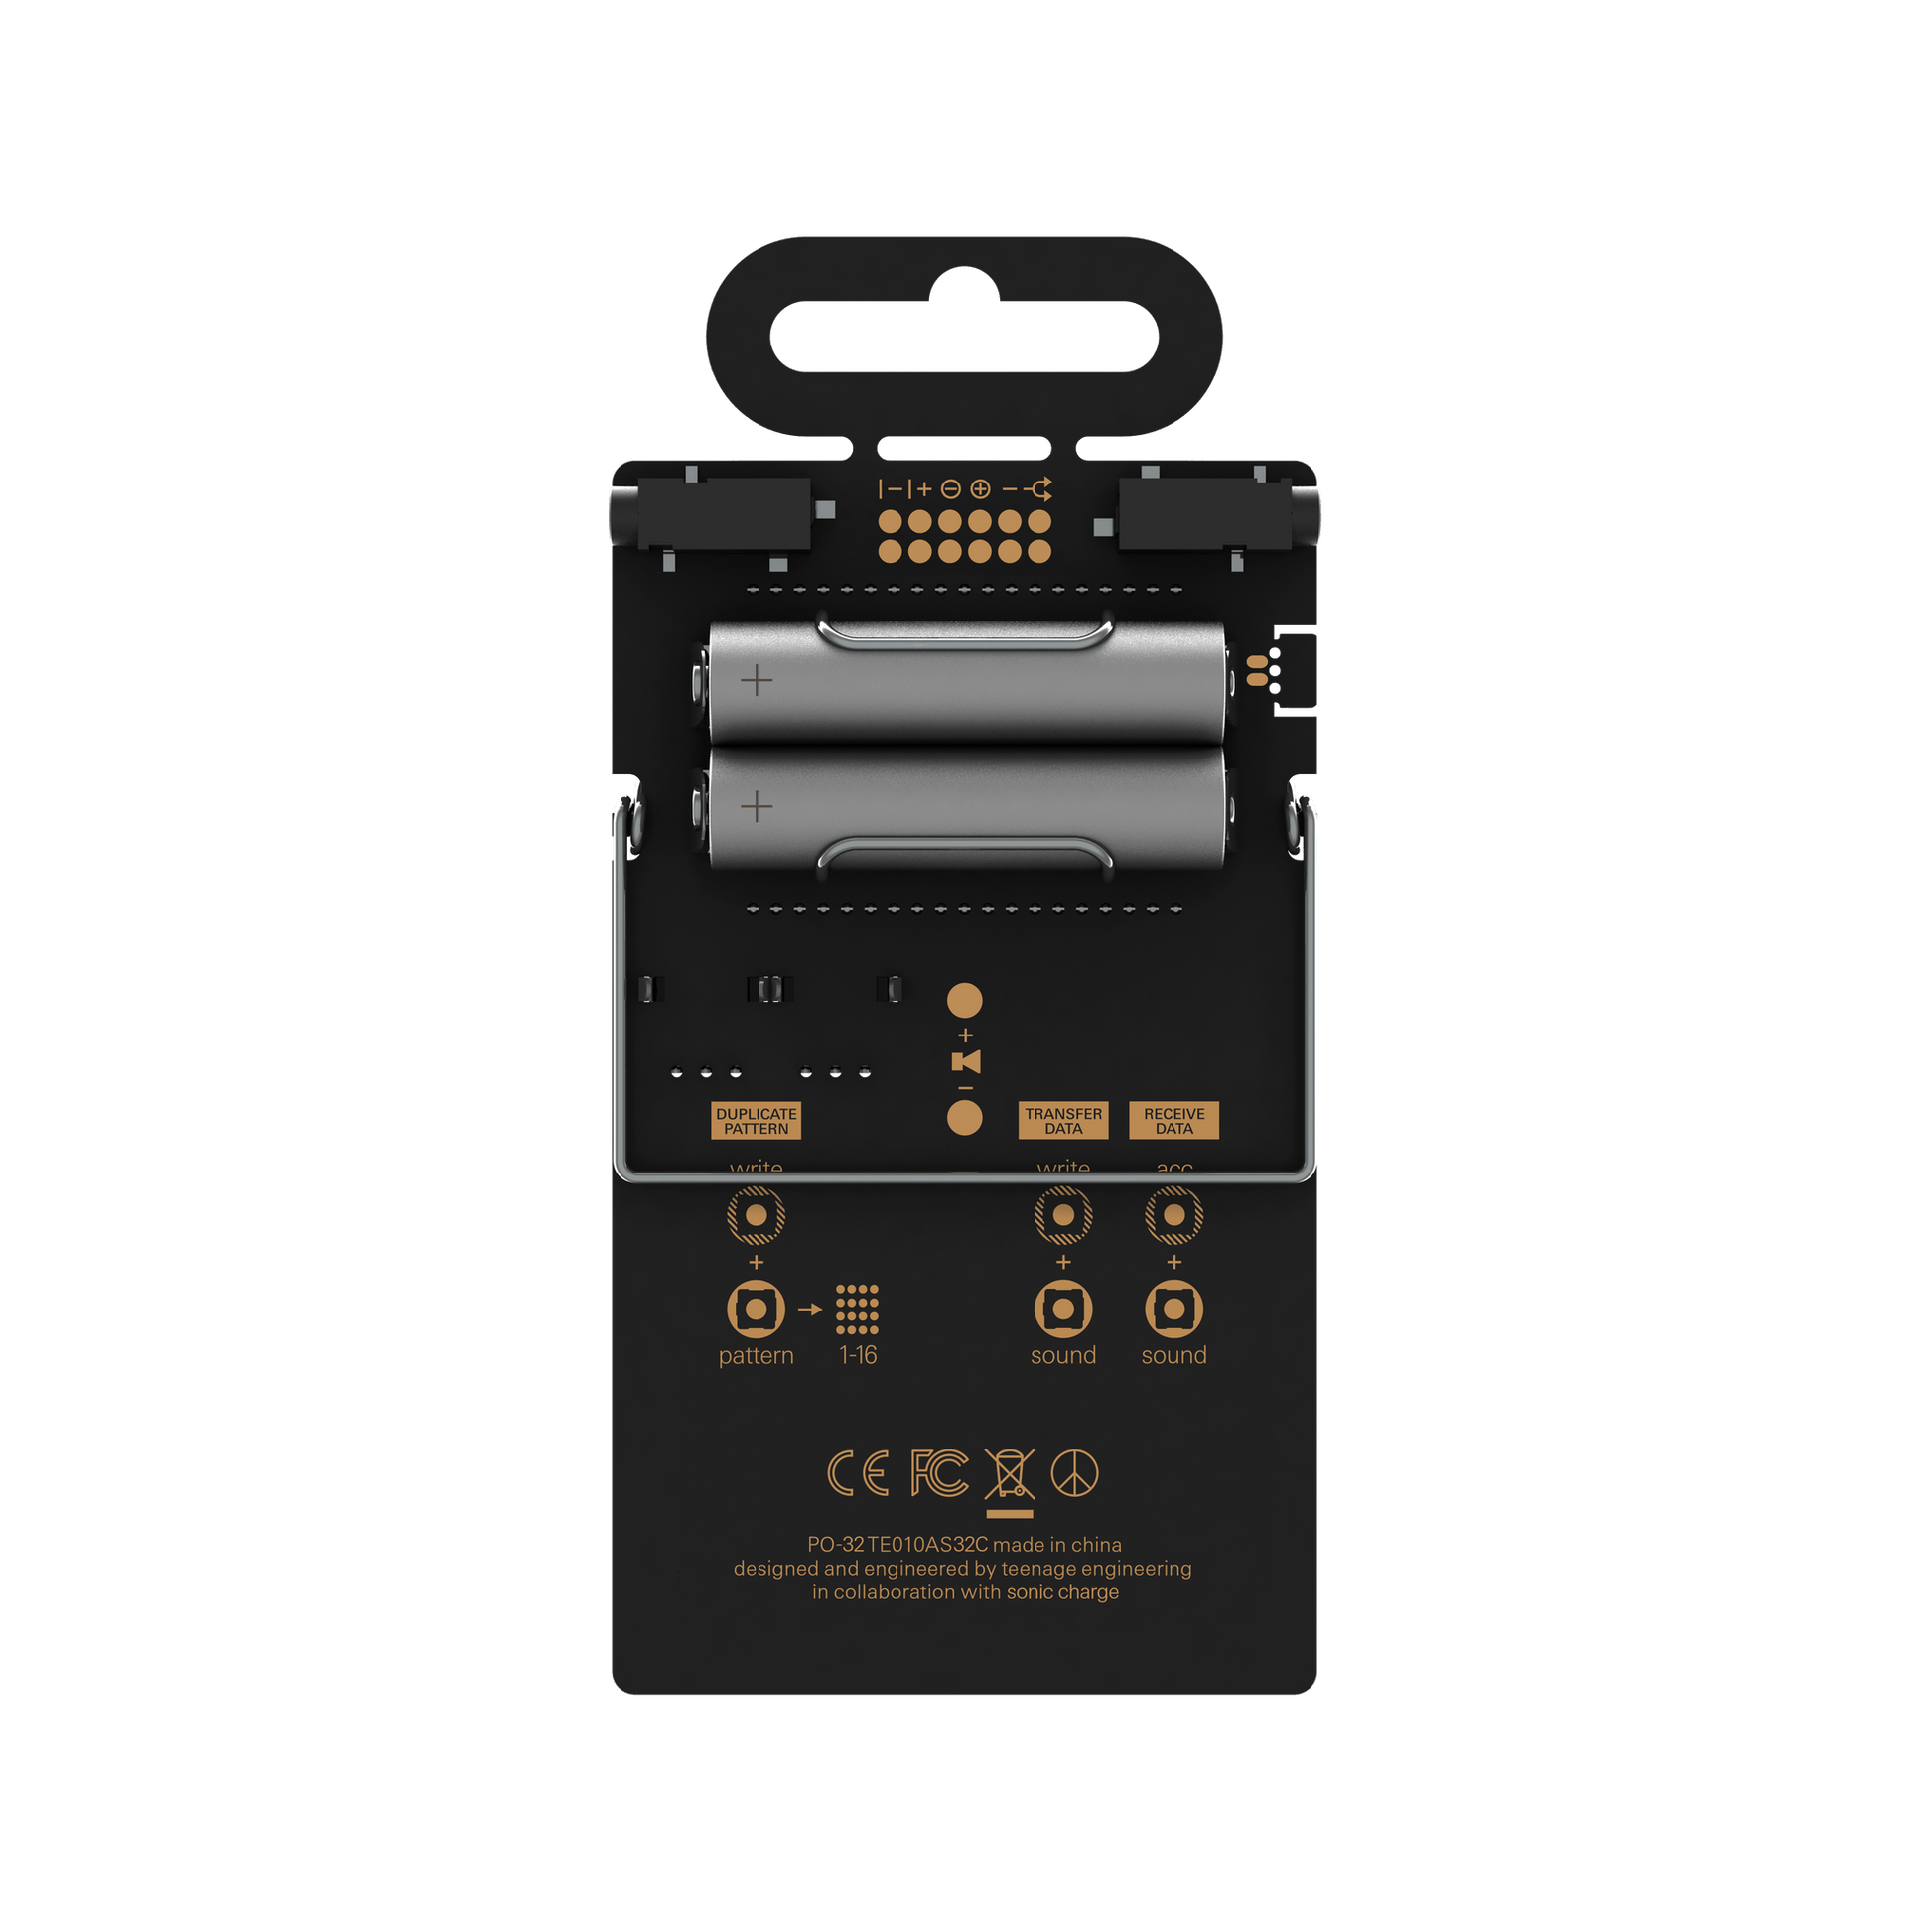 Teenage Engineering PO-32 Pocket Operator Tonic Drum Synthesizer and Sequencer back